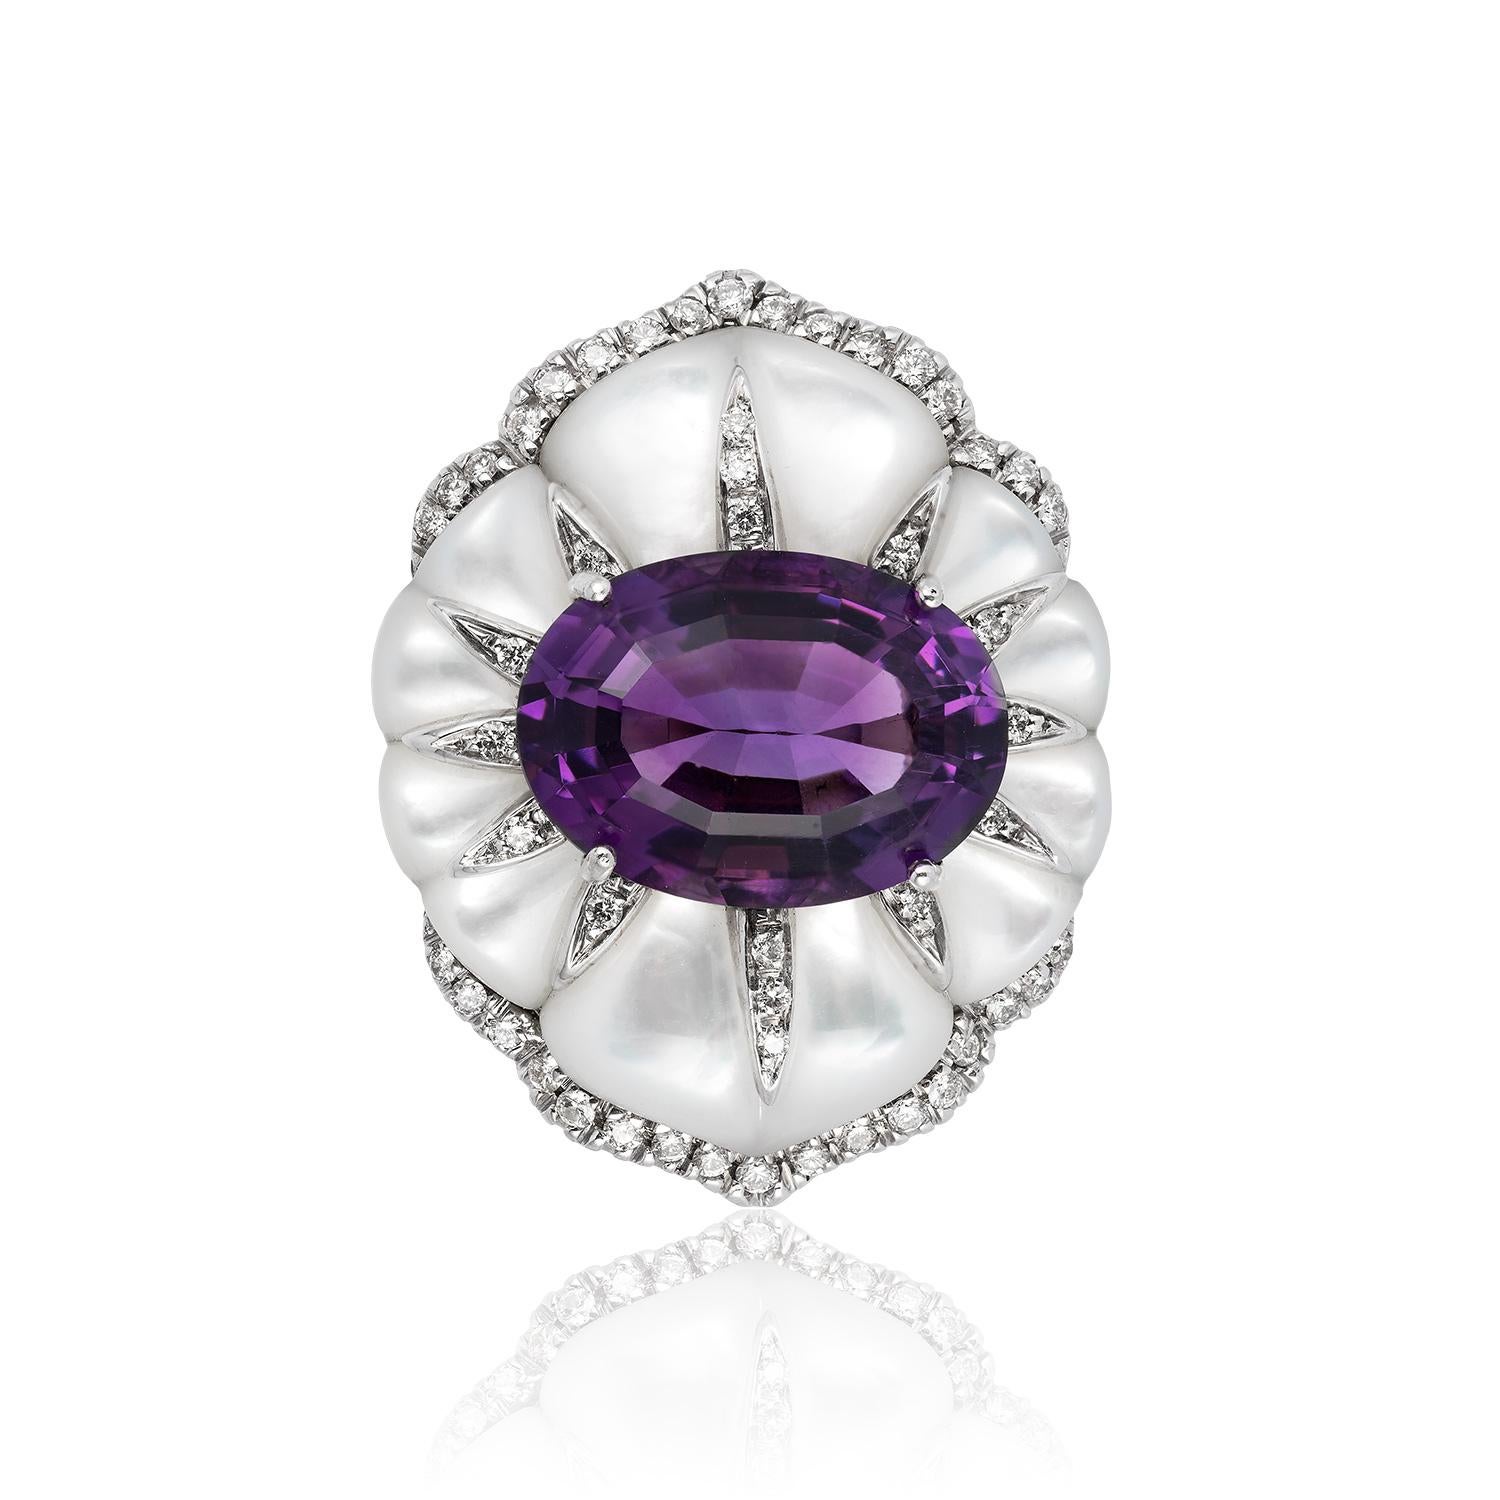 Andreoli Amethyst Mother of Pearl Diamond Cocktail Ring 18 Karat White Gold

This Andreoli ring features:

0.65ct Diamond
12.35ct Amethyst
Mother-of-Pearl
18 Karat White Gold

Studied, meticulously designed and created by Andreoli in Valenza, Italy